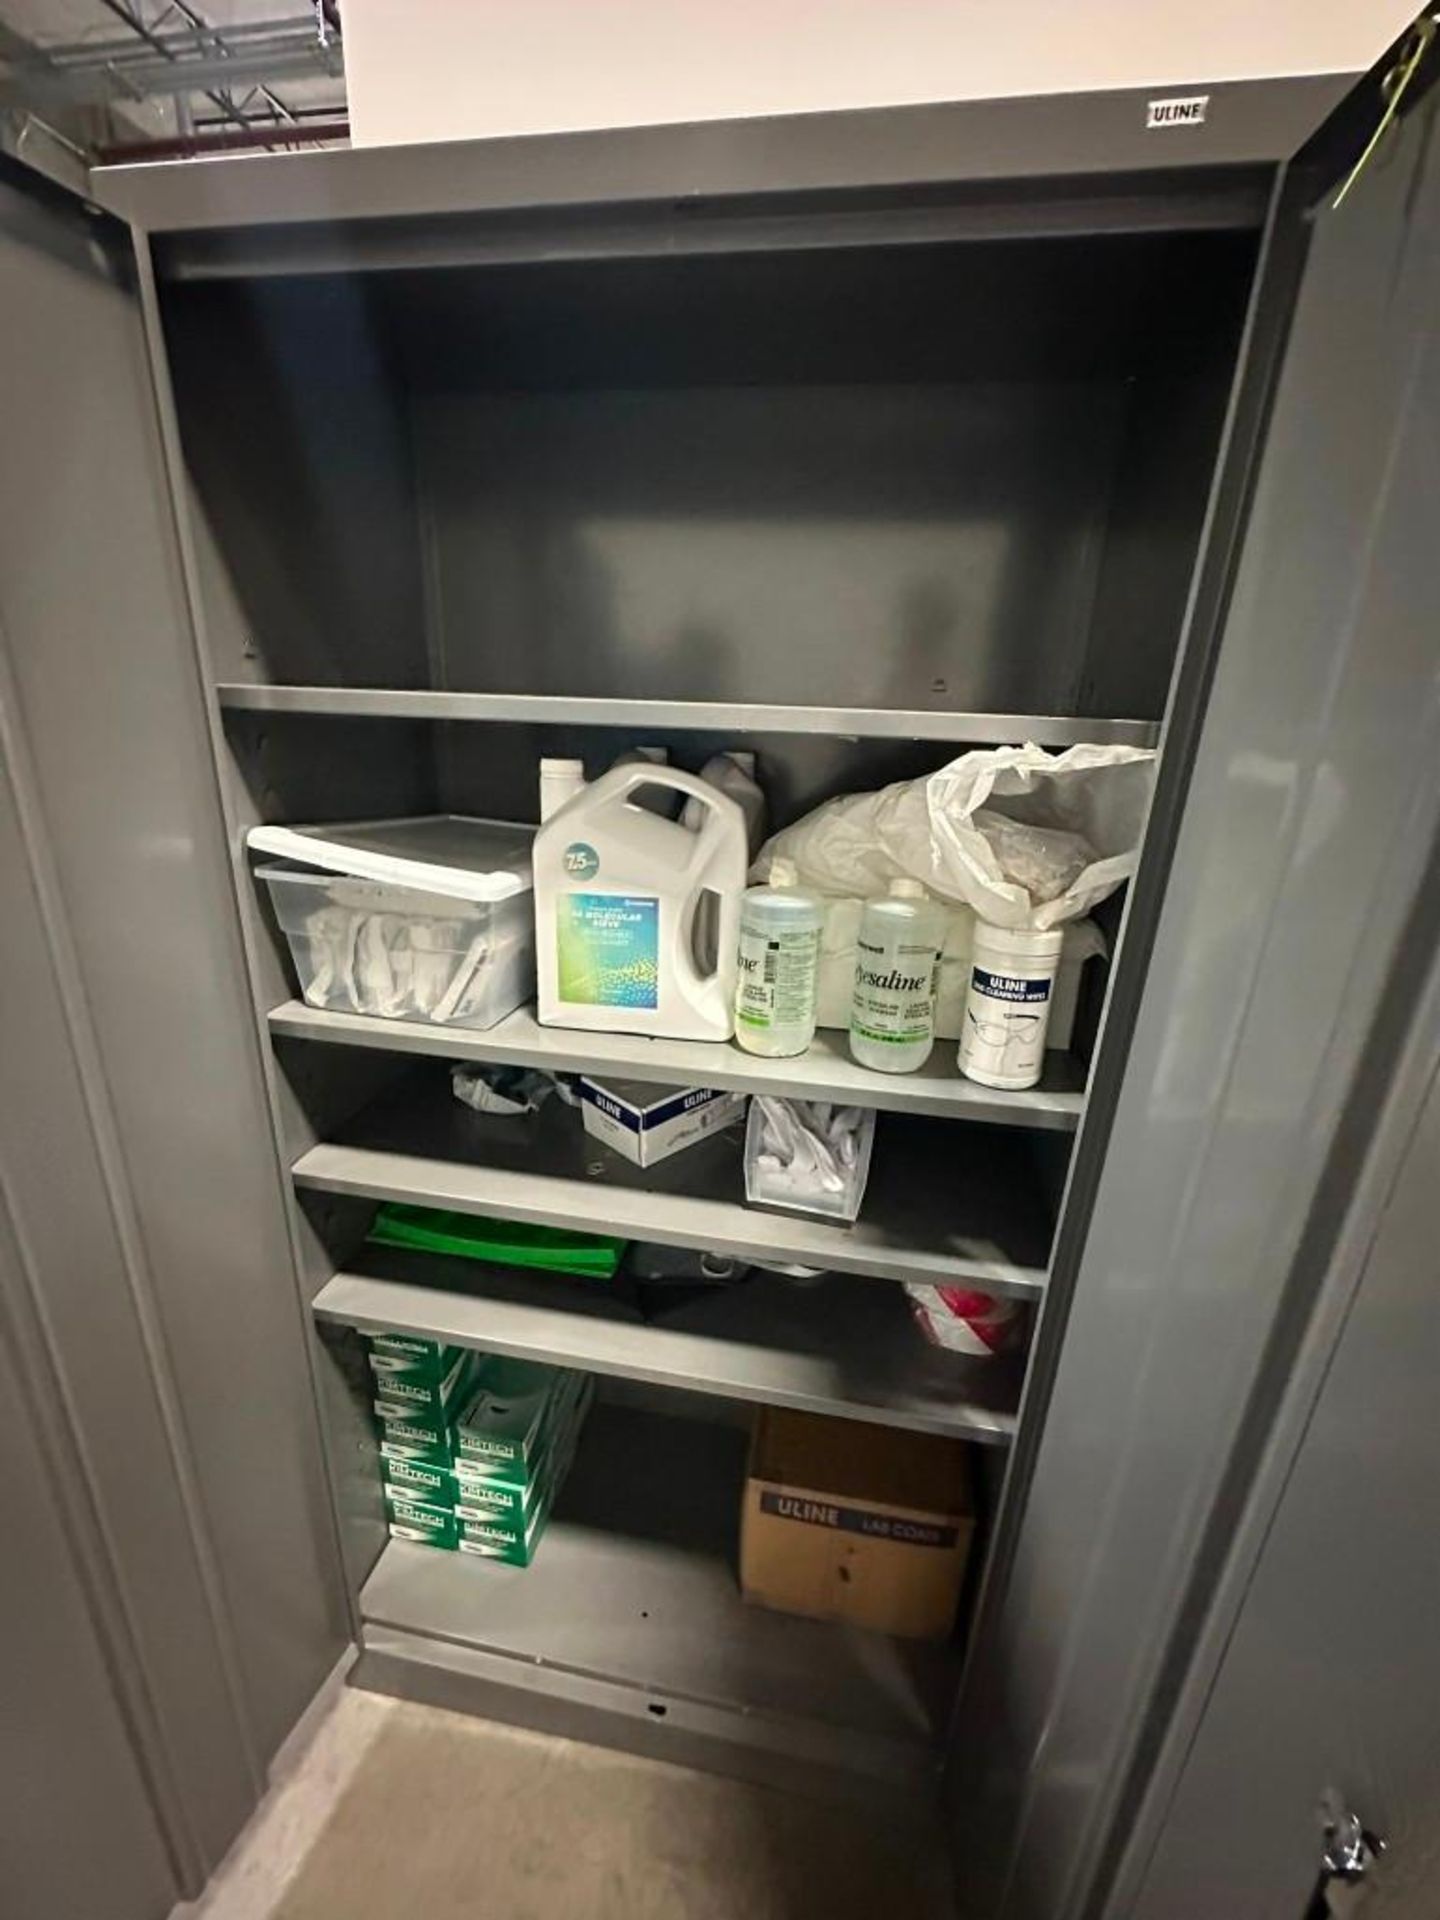 Lot: Uline Steel Cabinet with Misc. Contents - Image 2 of 3